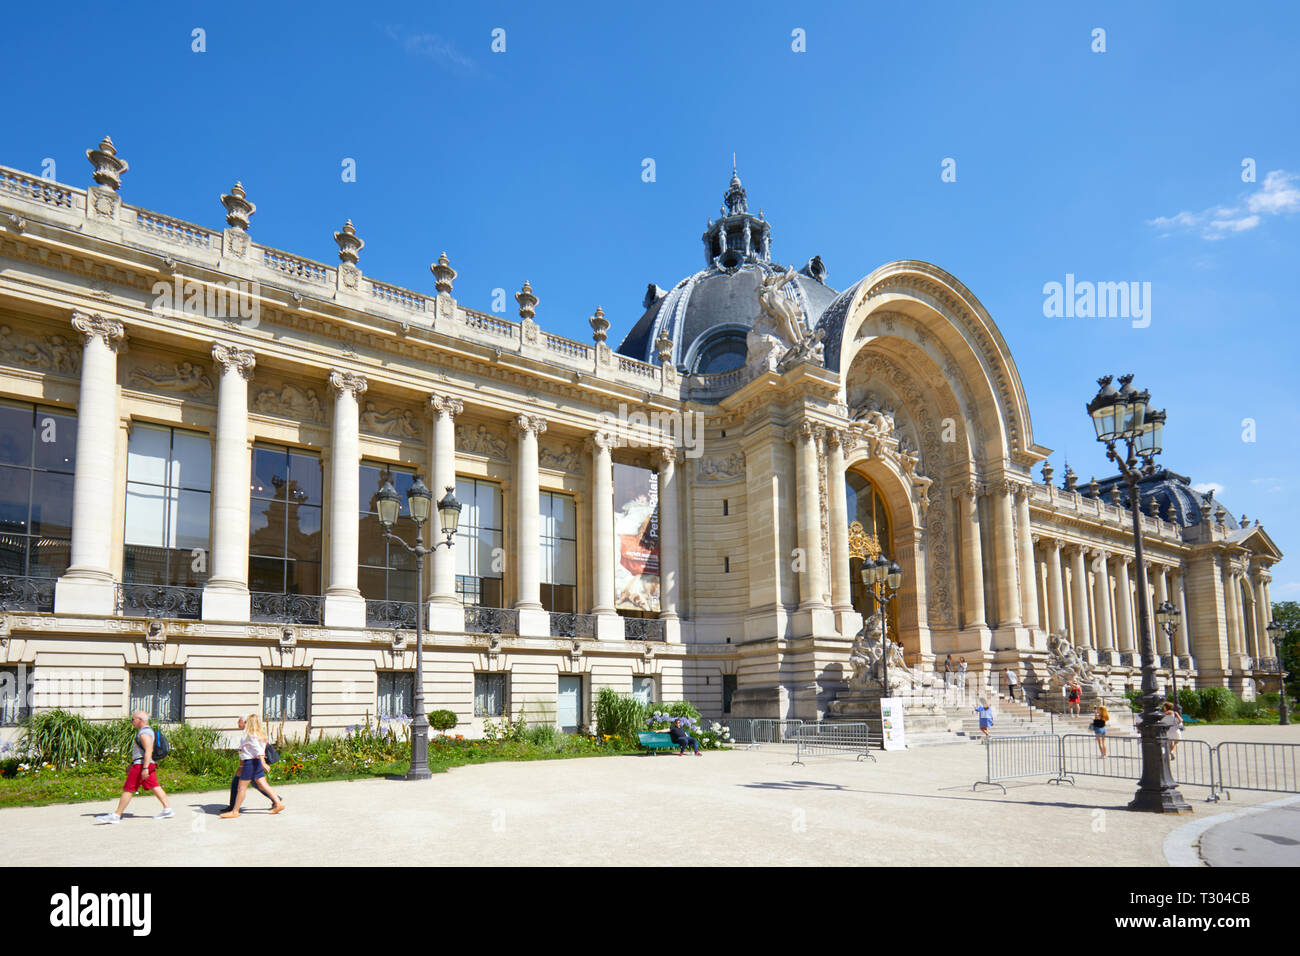 PARIS, FRANCE - JULY 21, 2017: Petit Palais building in a sunny summer day, clear blue sky in Paris, France. Stock Photo